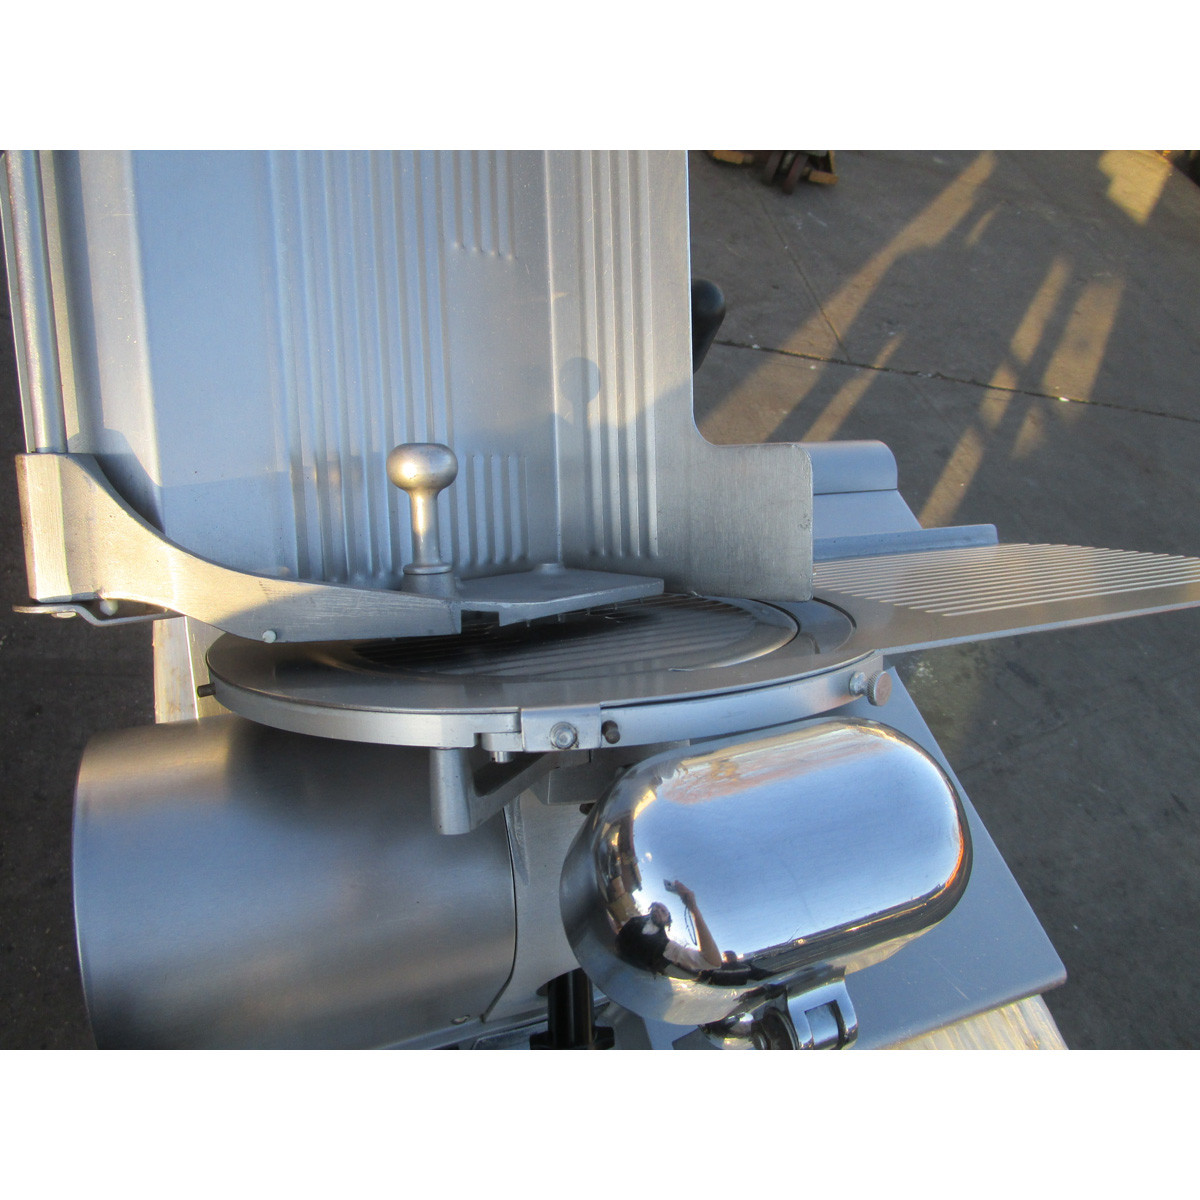 Globe 3500 Meat Slicer 0.5 HP, Used Excellent Condition image 5